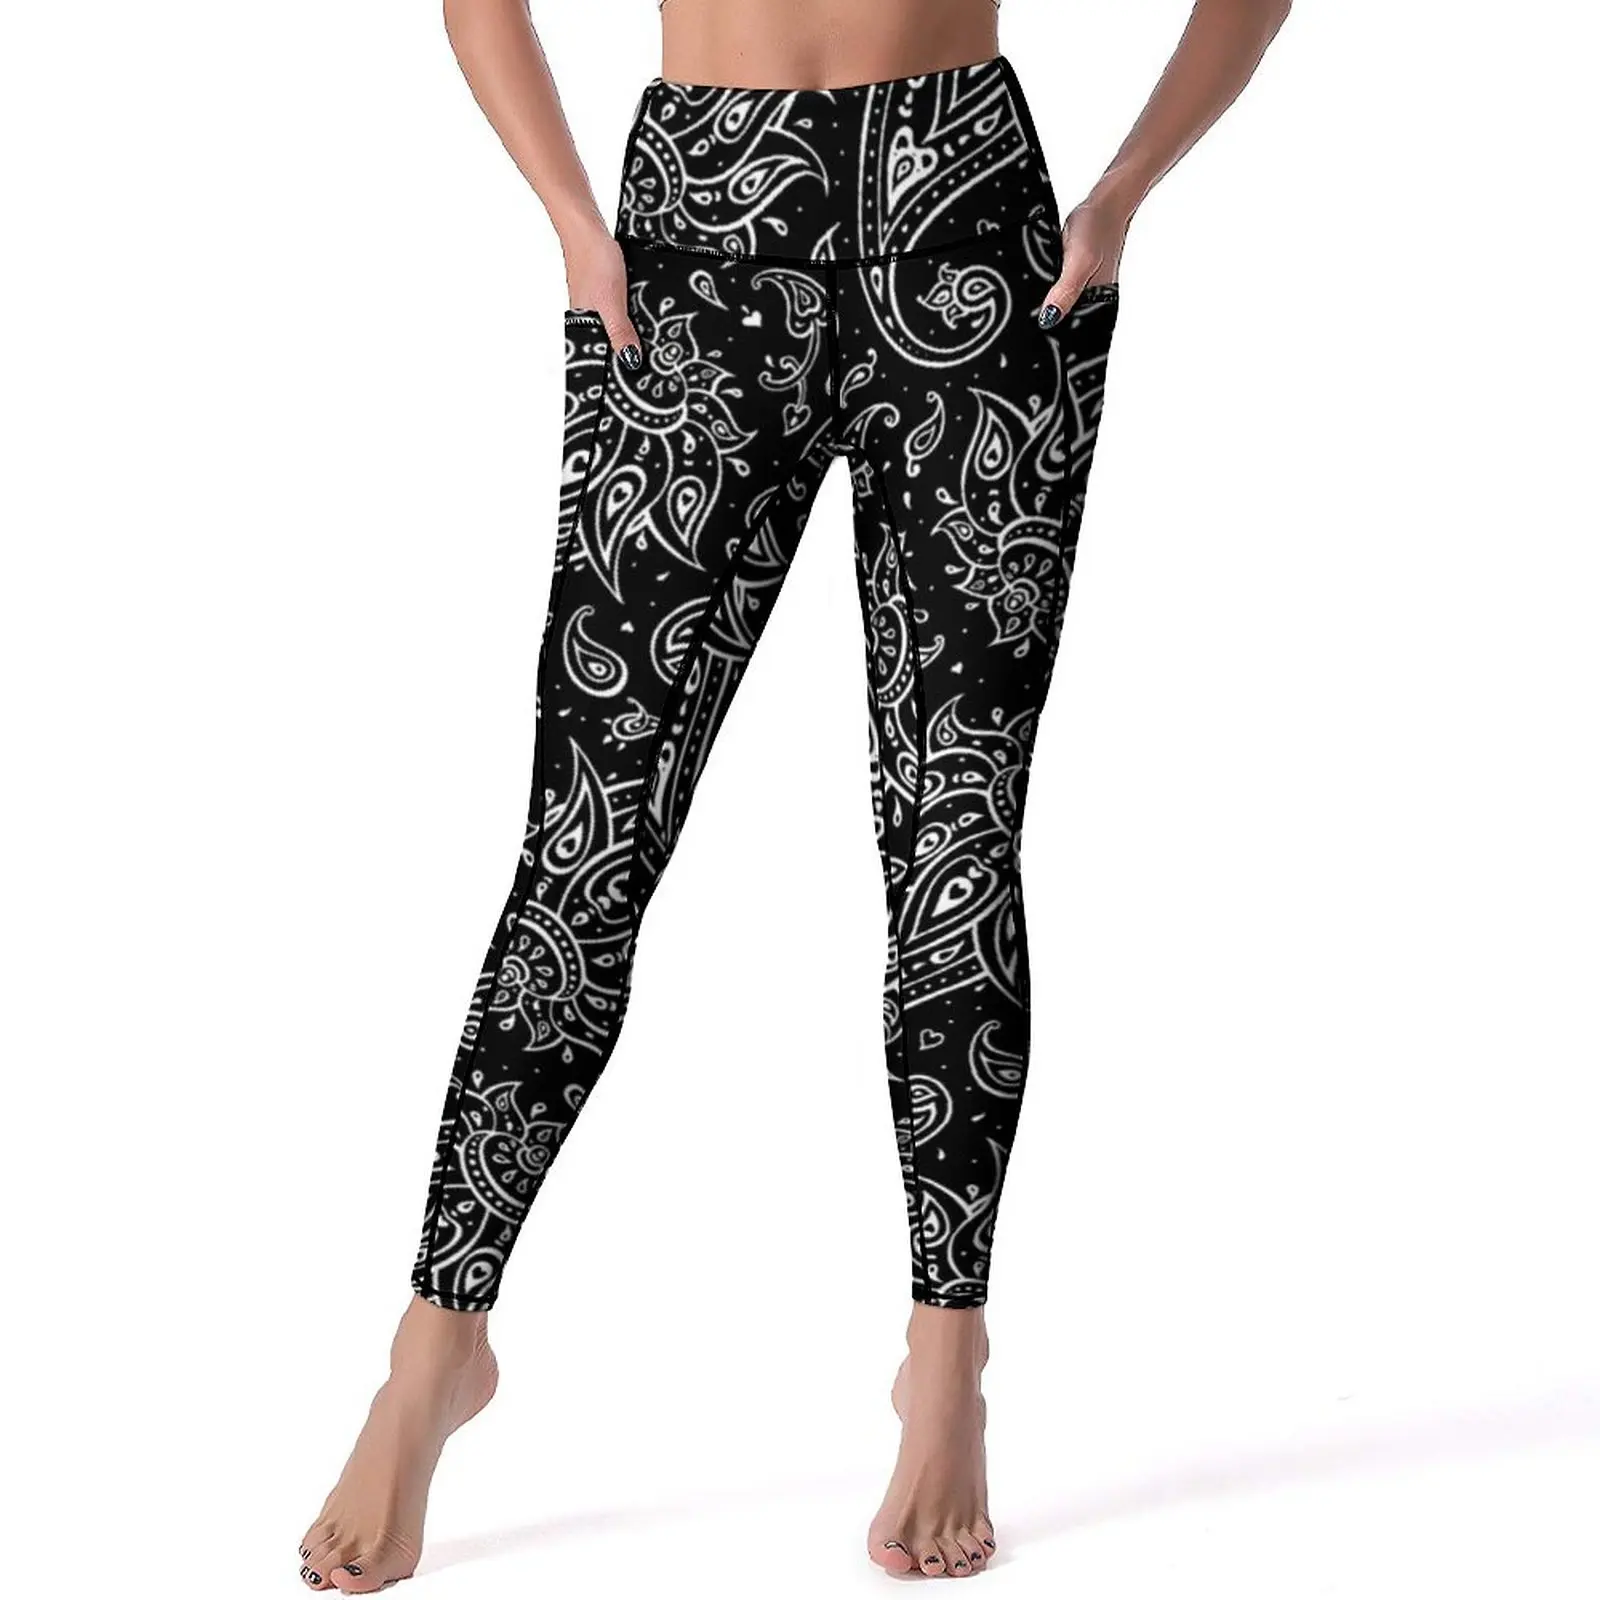 

Baroque Floral Yoga Pants Pockets White Paisley Leggings High Waist Novelty Yoga Sports Tights Stretch Graphic Workout Leggins